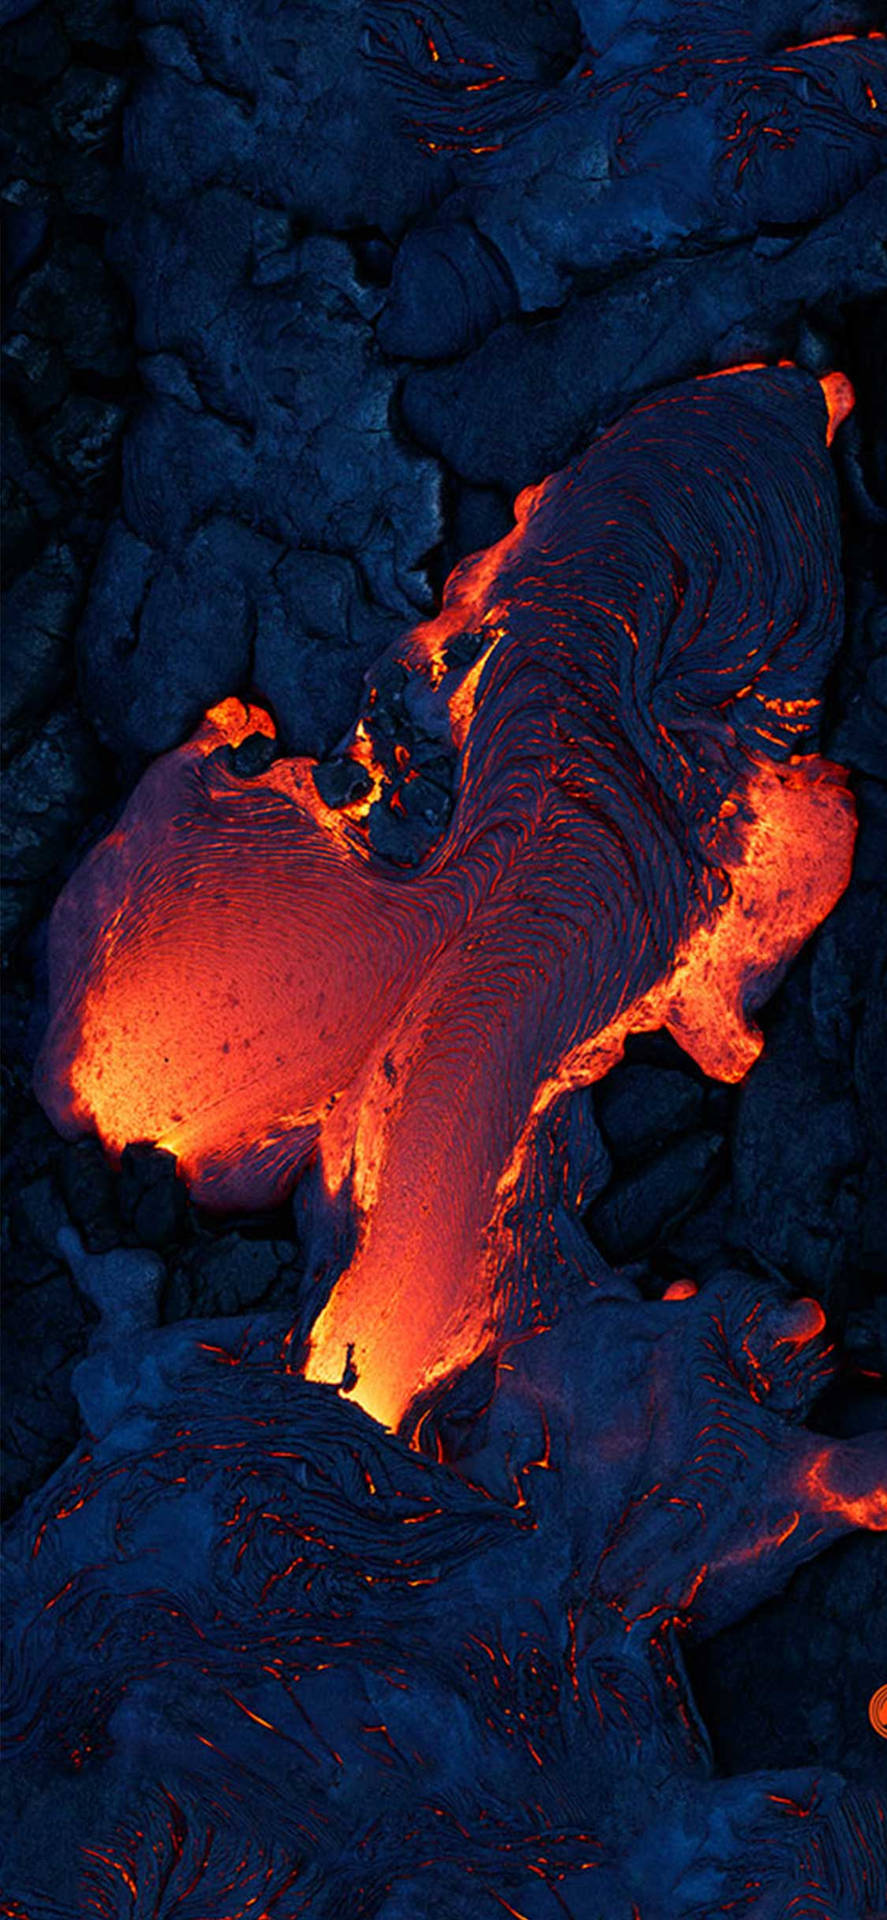 Vibrant Oled Display Of Molten Lava On Iphone Background